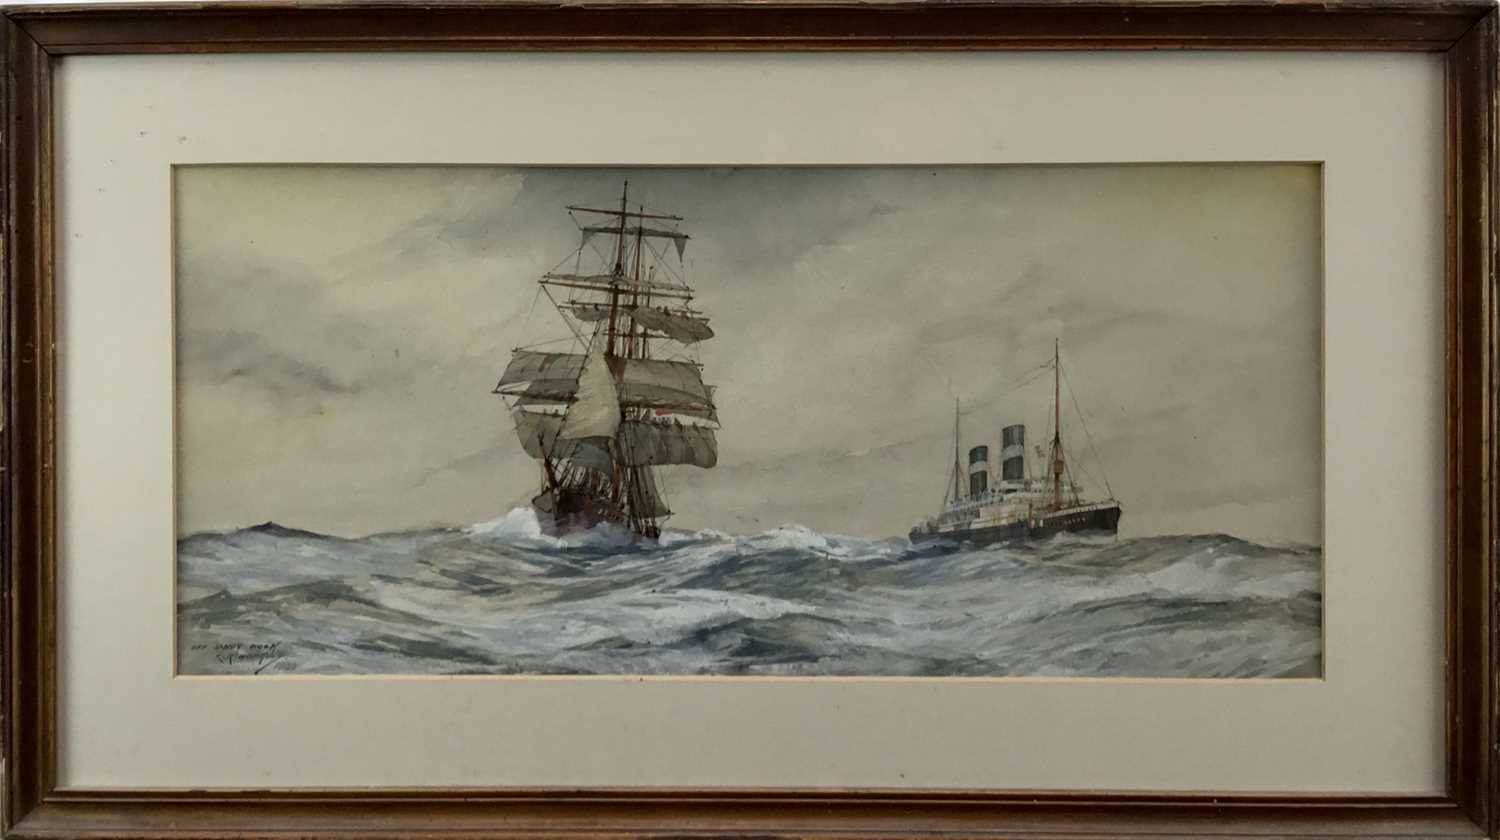 Lot 72 - C. Hopkins watercolour, off Sandy Hook, signed inscribed and dated 1920.